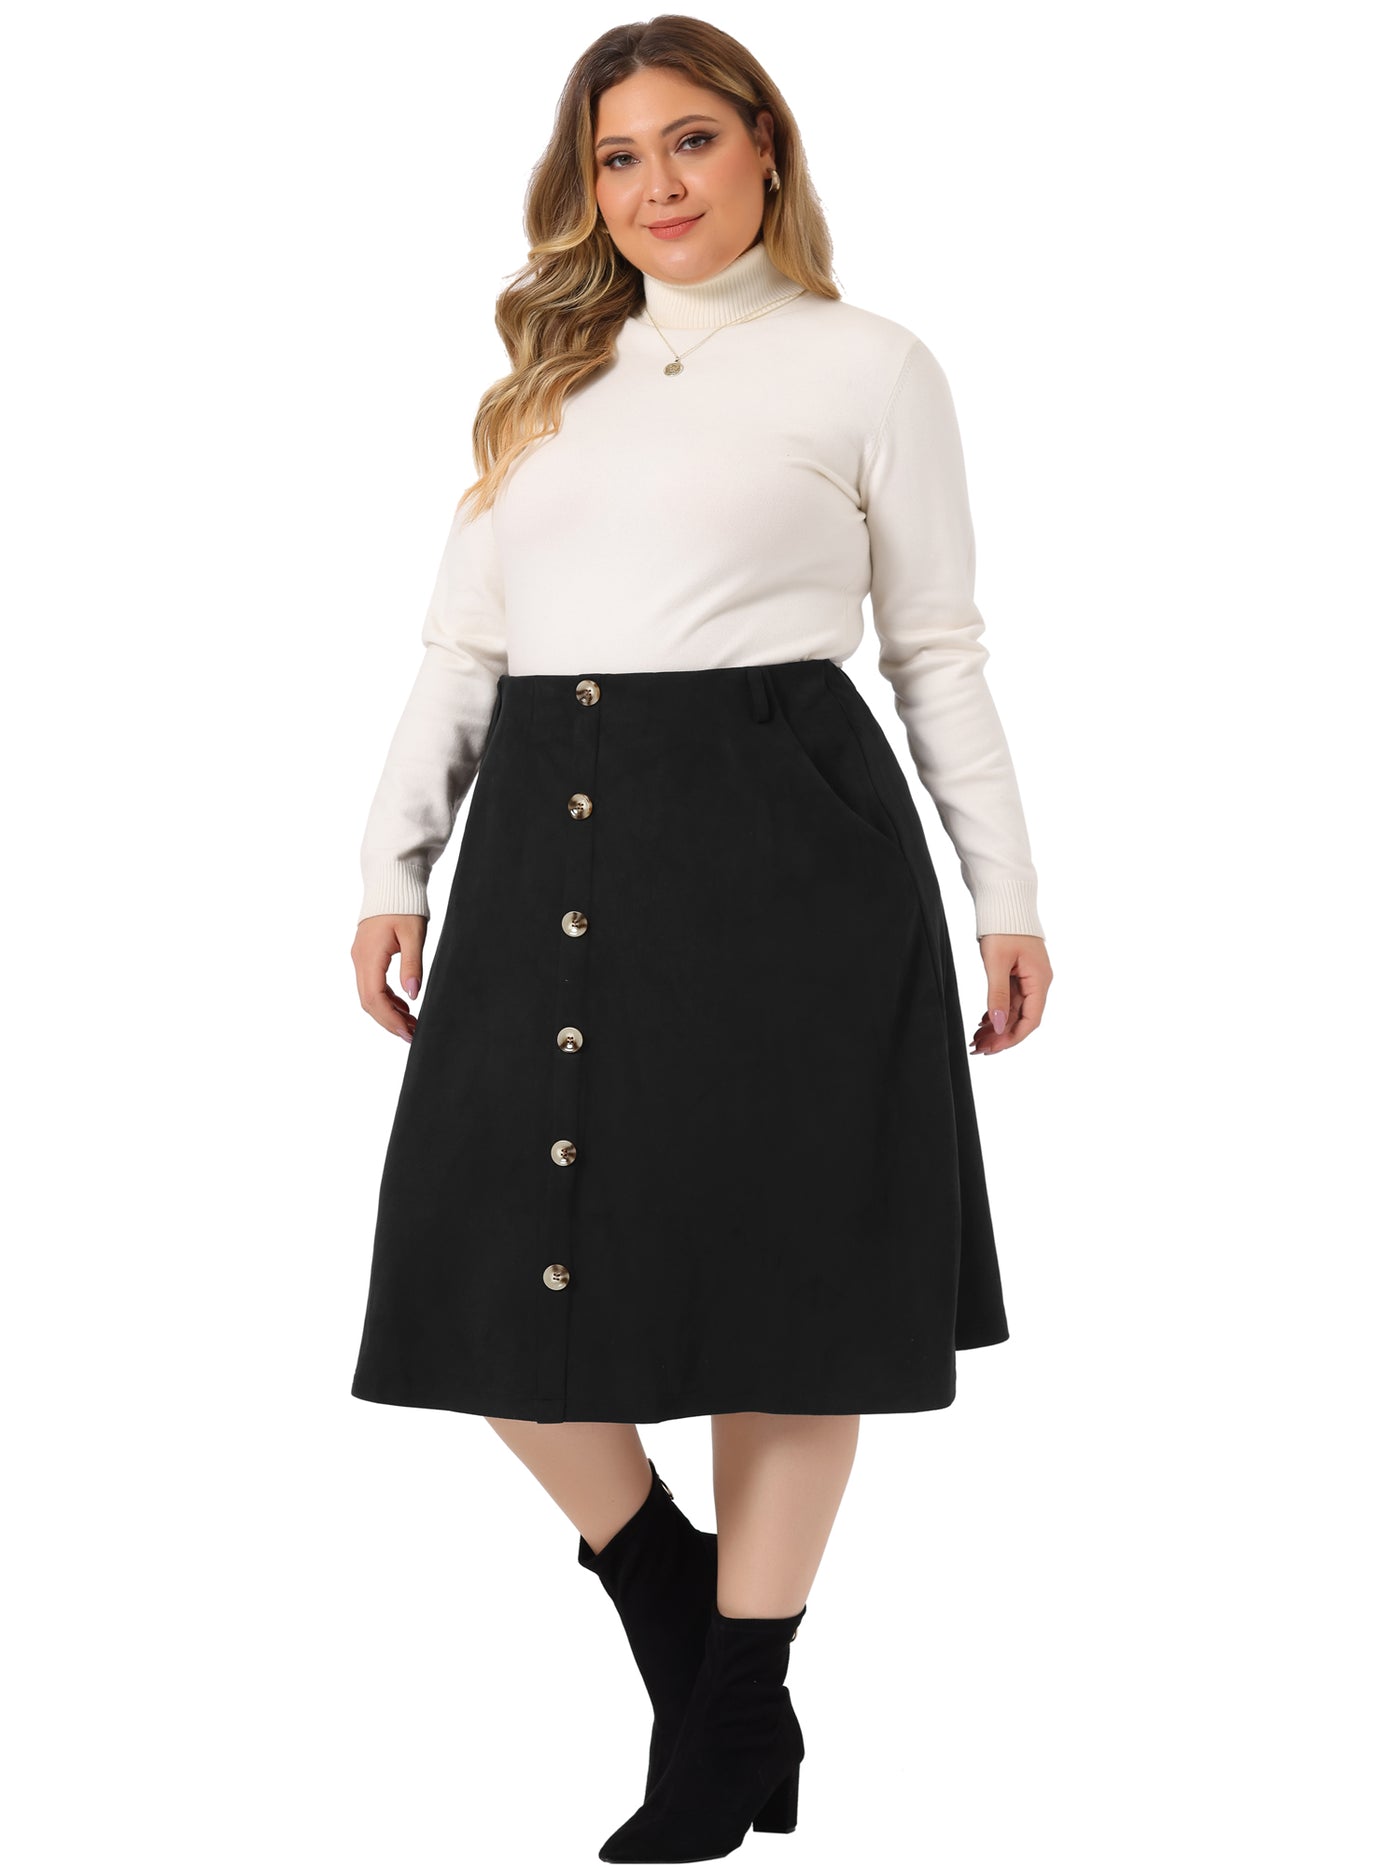 Bublédon Faux Suede Skirt Knee Length for Women Plus Size Elastic Waist Flared Stretch a Line Midi Skirts